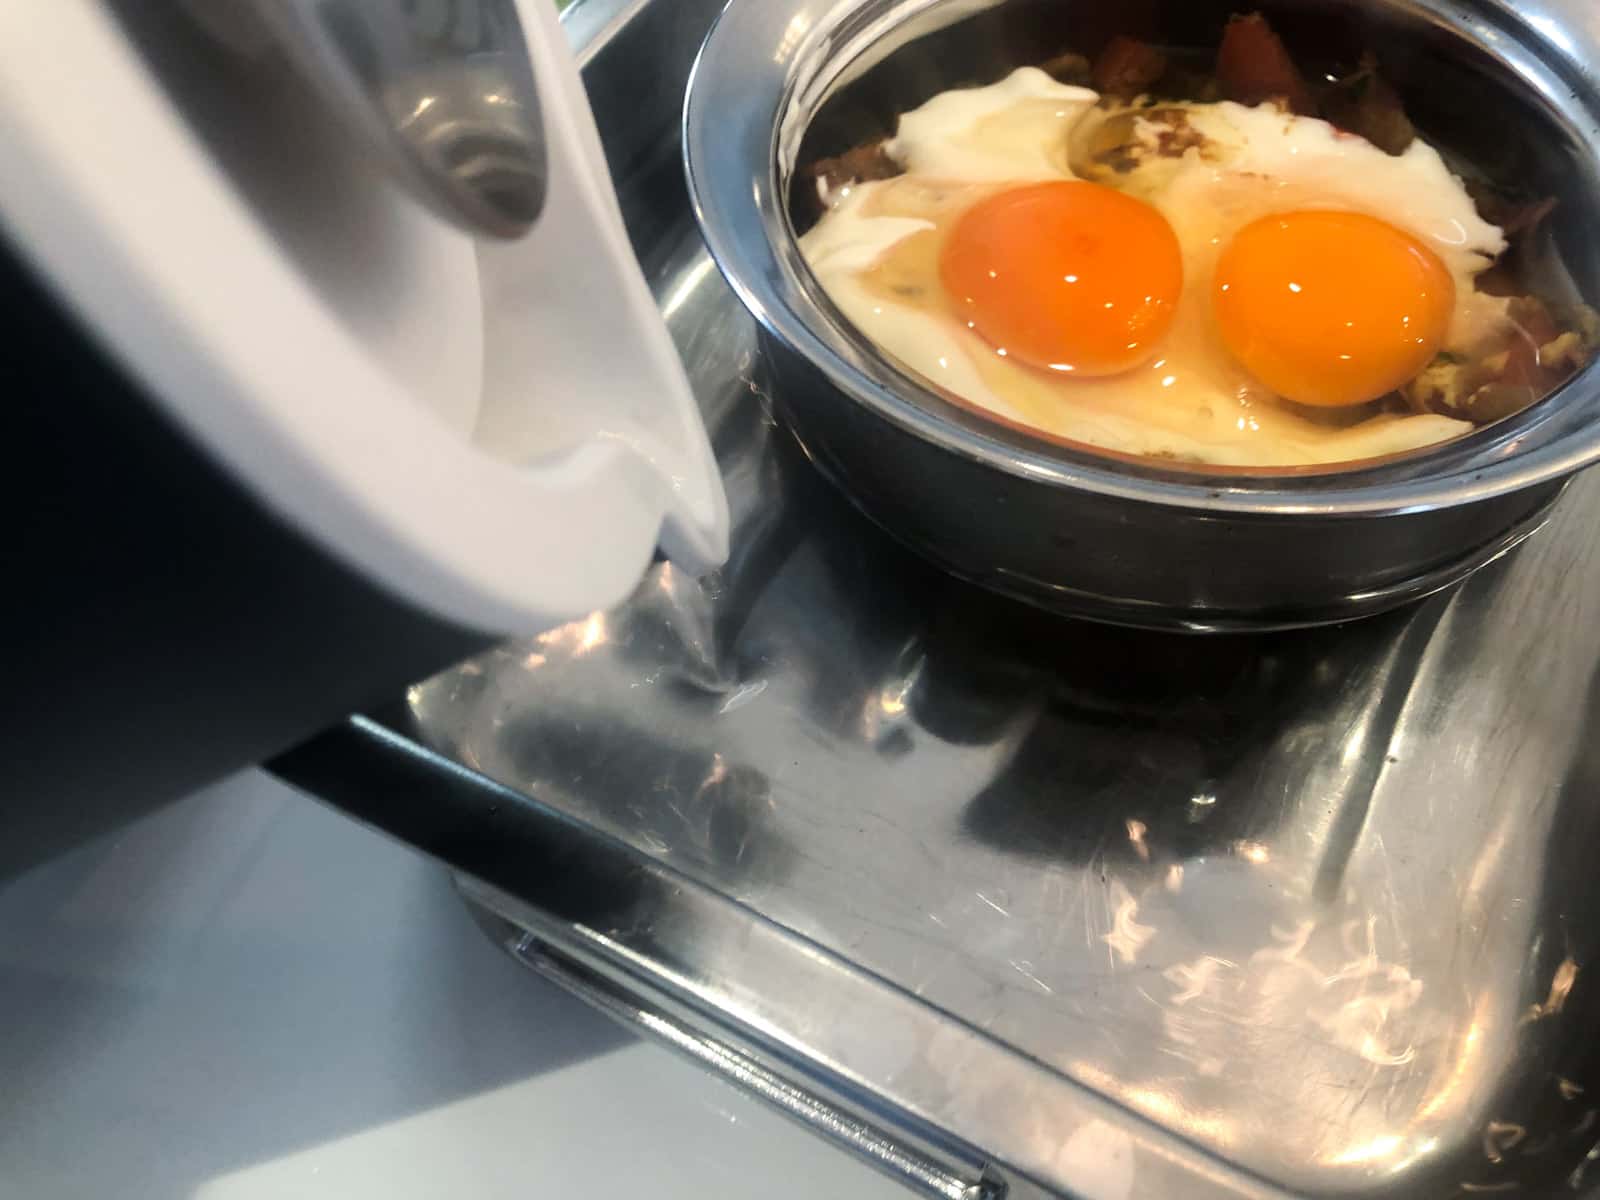 Adding boiling water to a baking tray to surround a baked egg dish to allow it to cook gently in the oven by forming a banmarie.